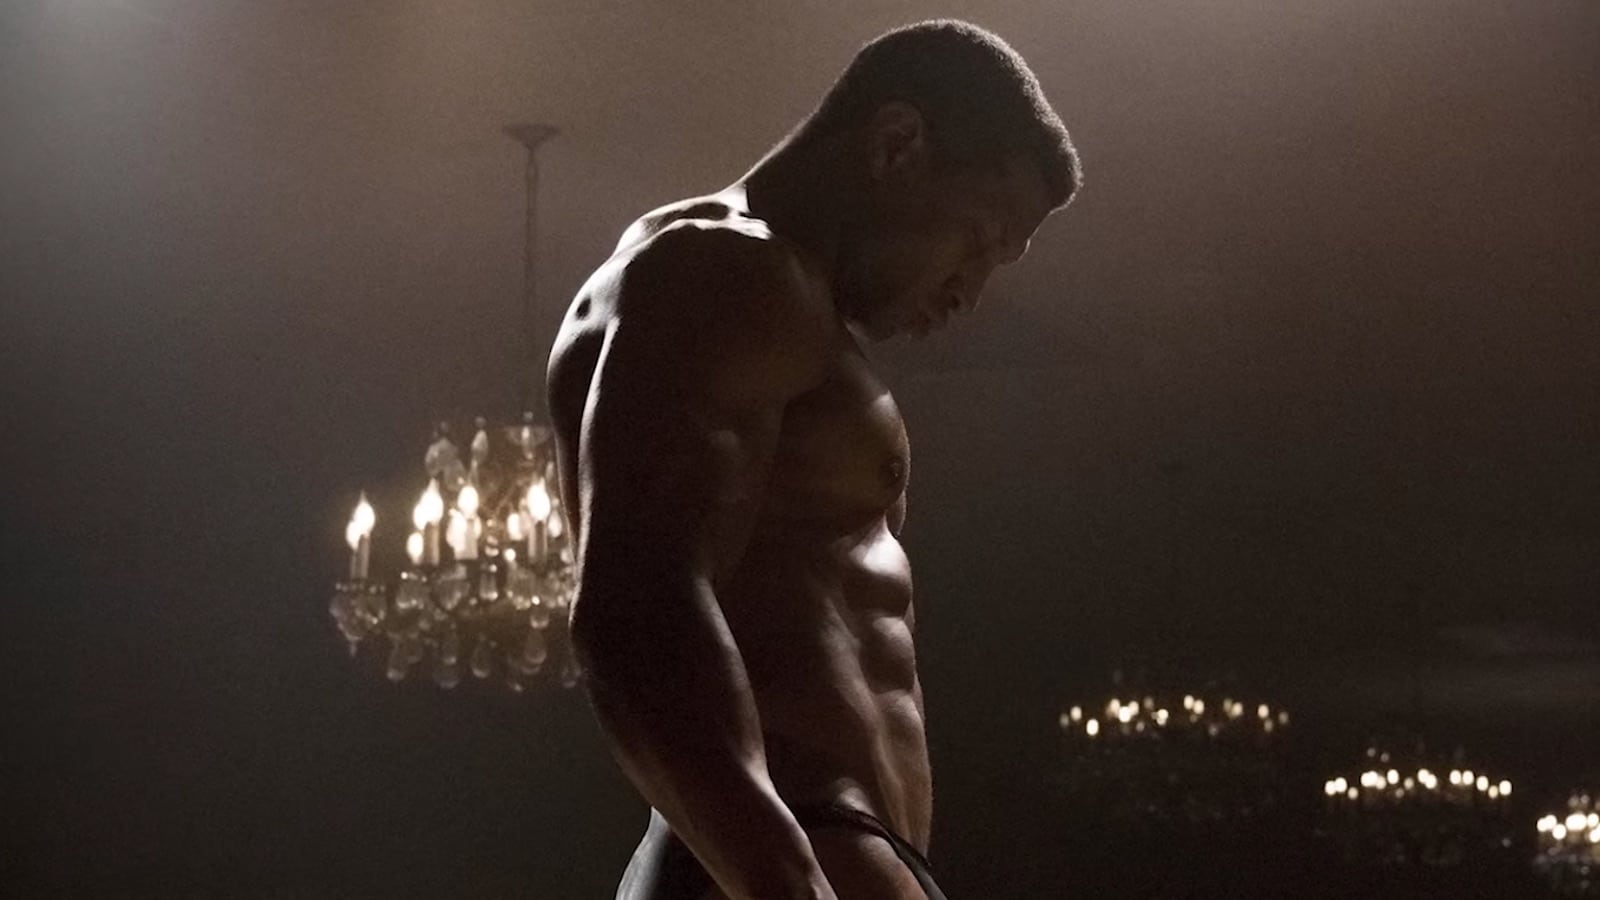 actor-jonathan-majors-ate-6,100-calories-a-day-to-become-a-bodybuilder-in-“magazine-dreams”-–-breaking-muscle